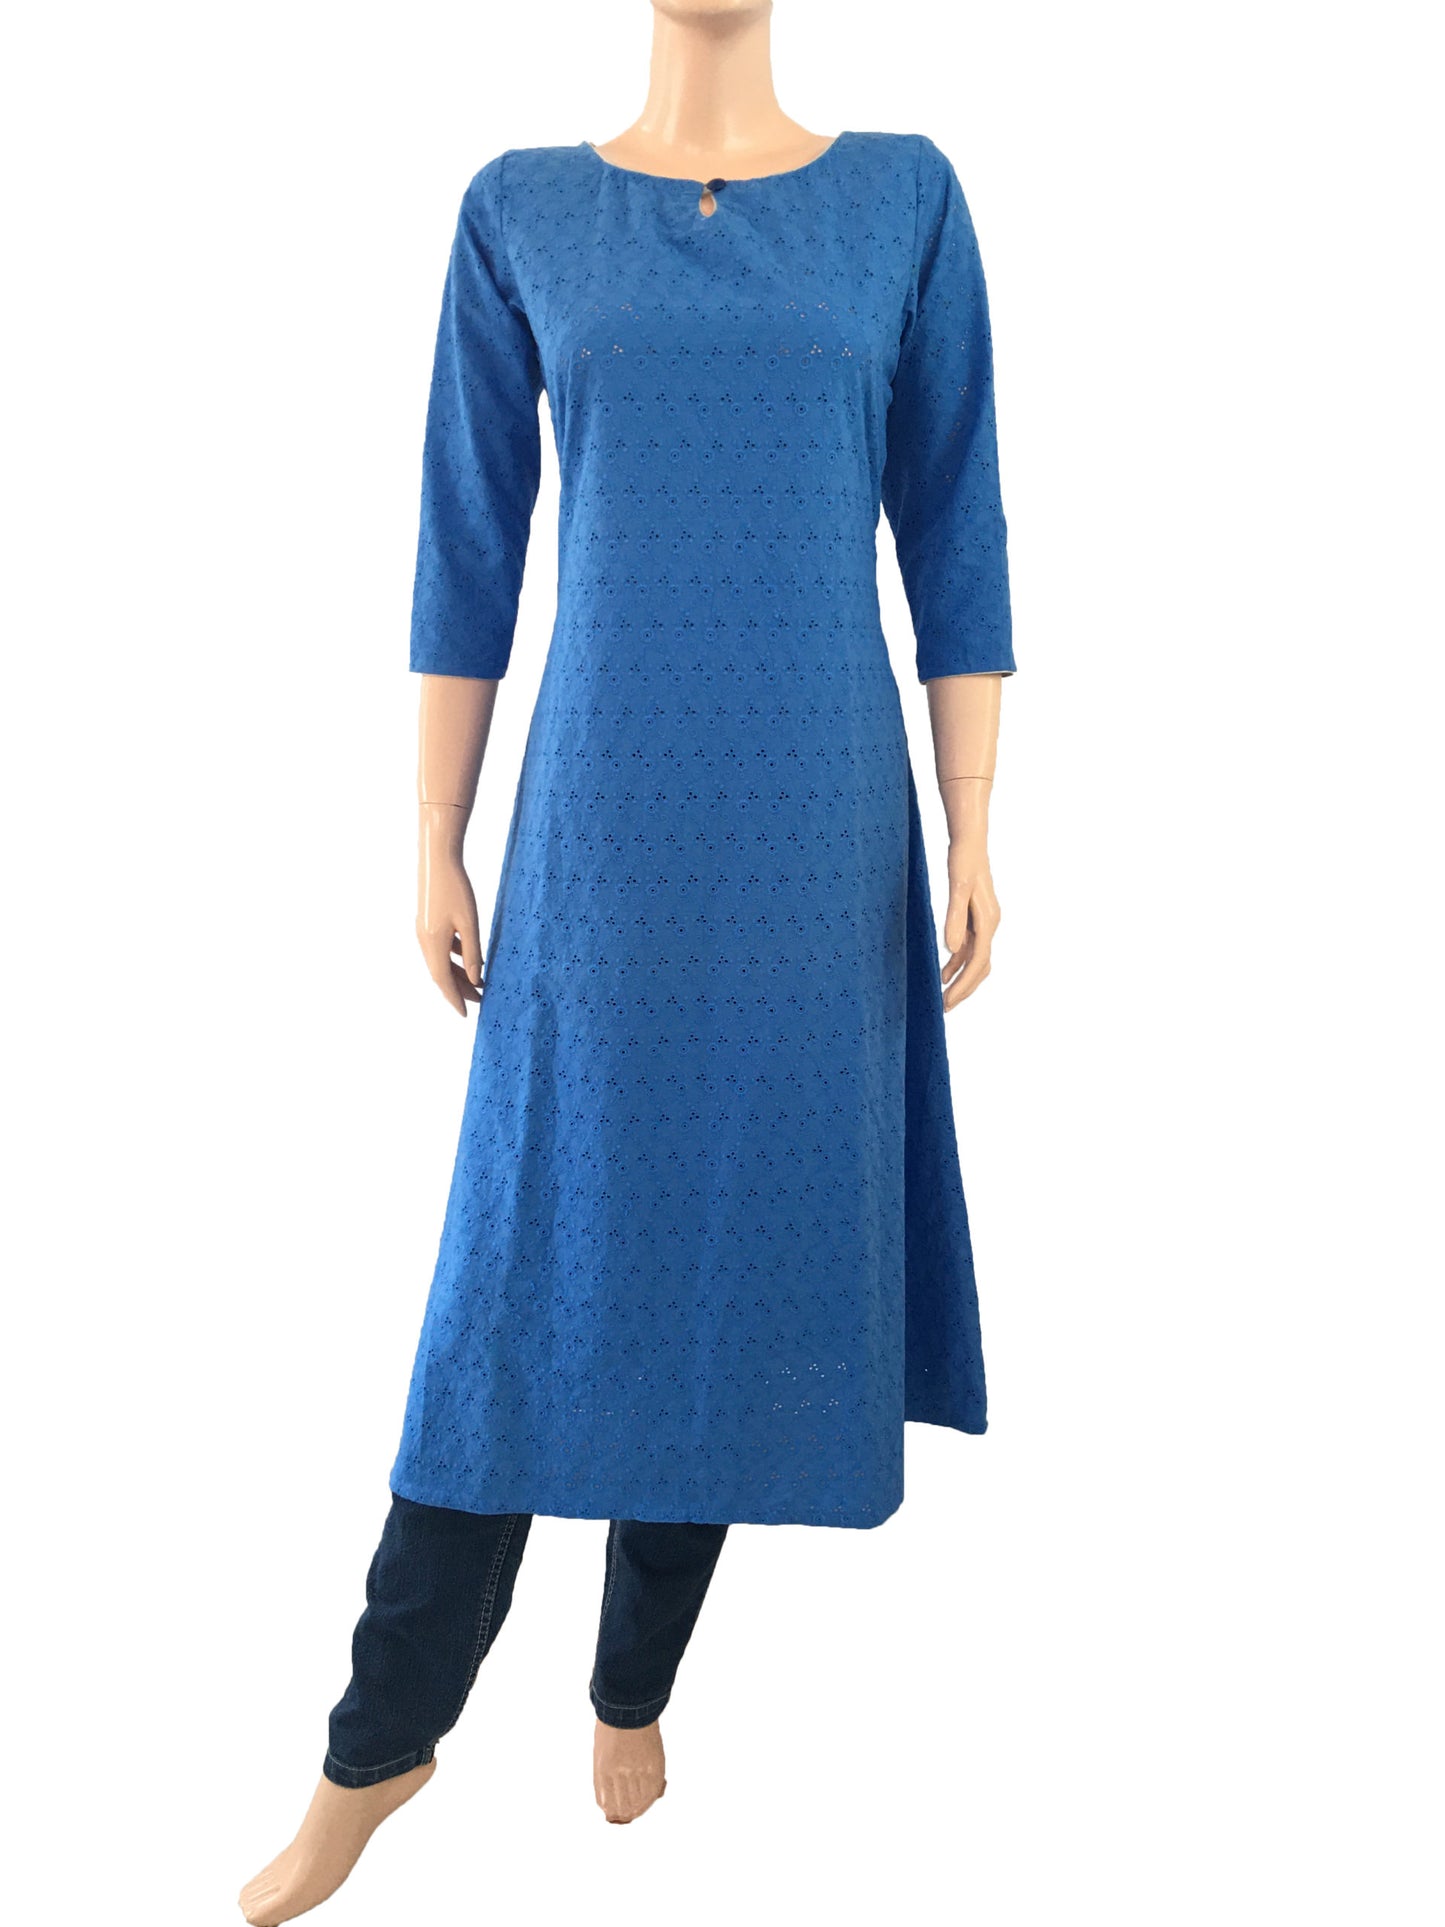 Buy Readymade Kurtis Embroidery Online